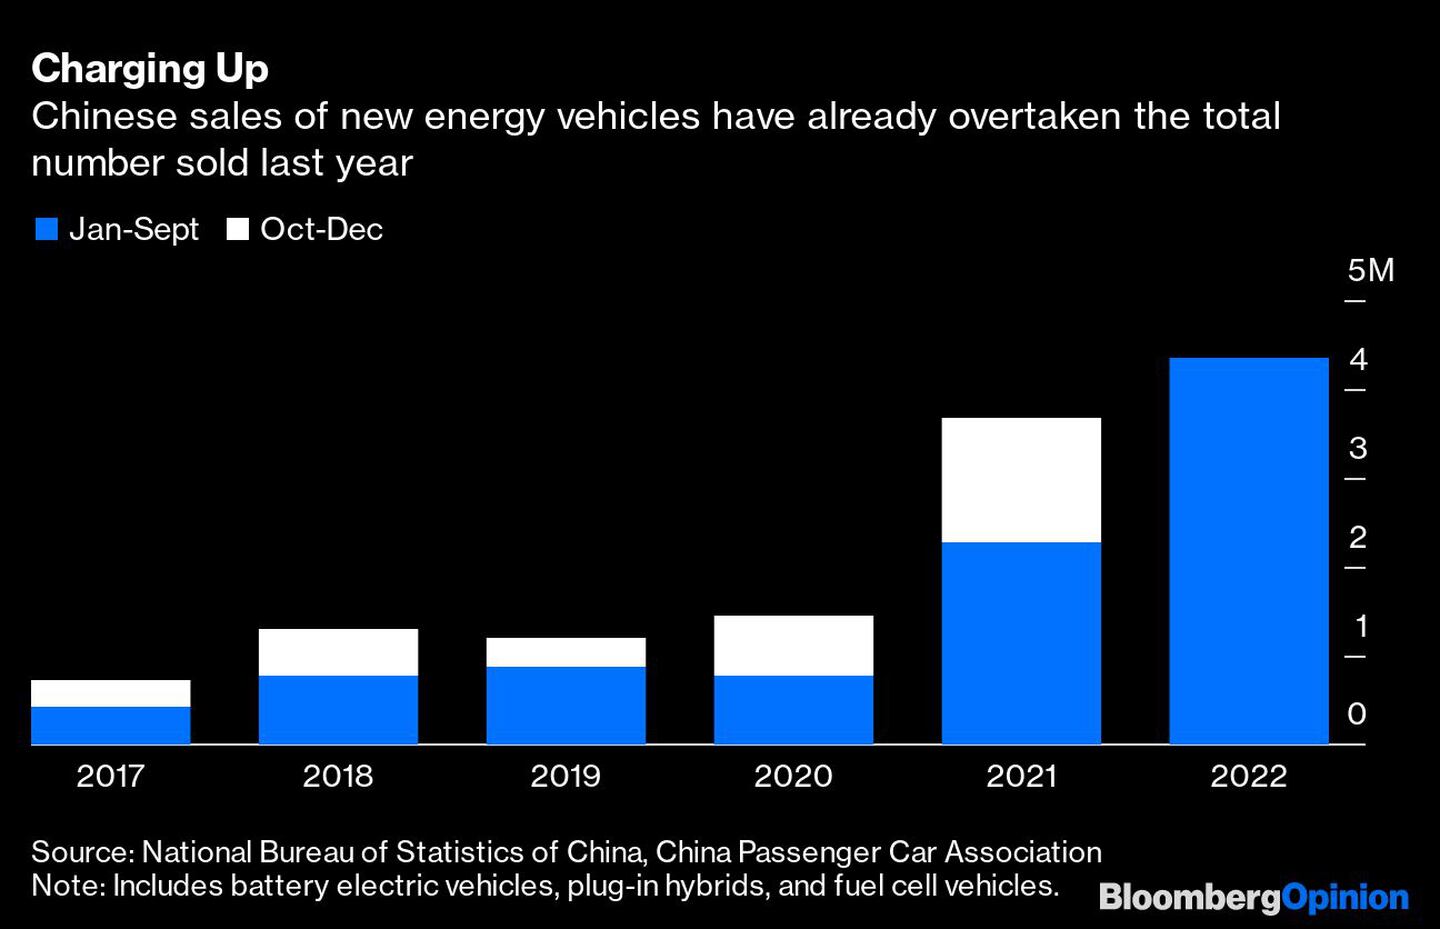 Charging Up | Chinese sales of new energy vehicles have already overtaken the total number sold last yeardfd